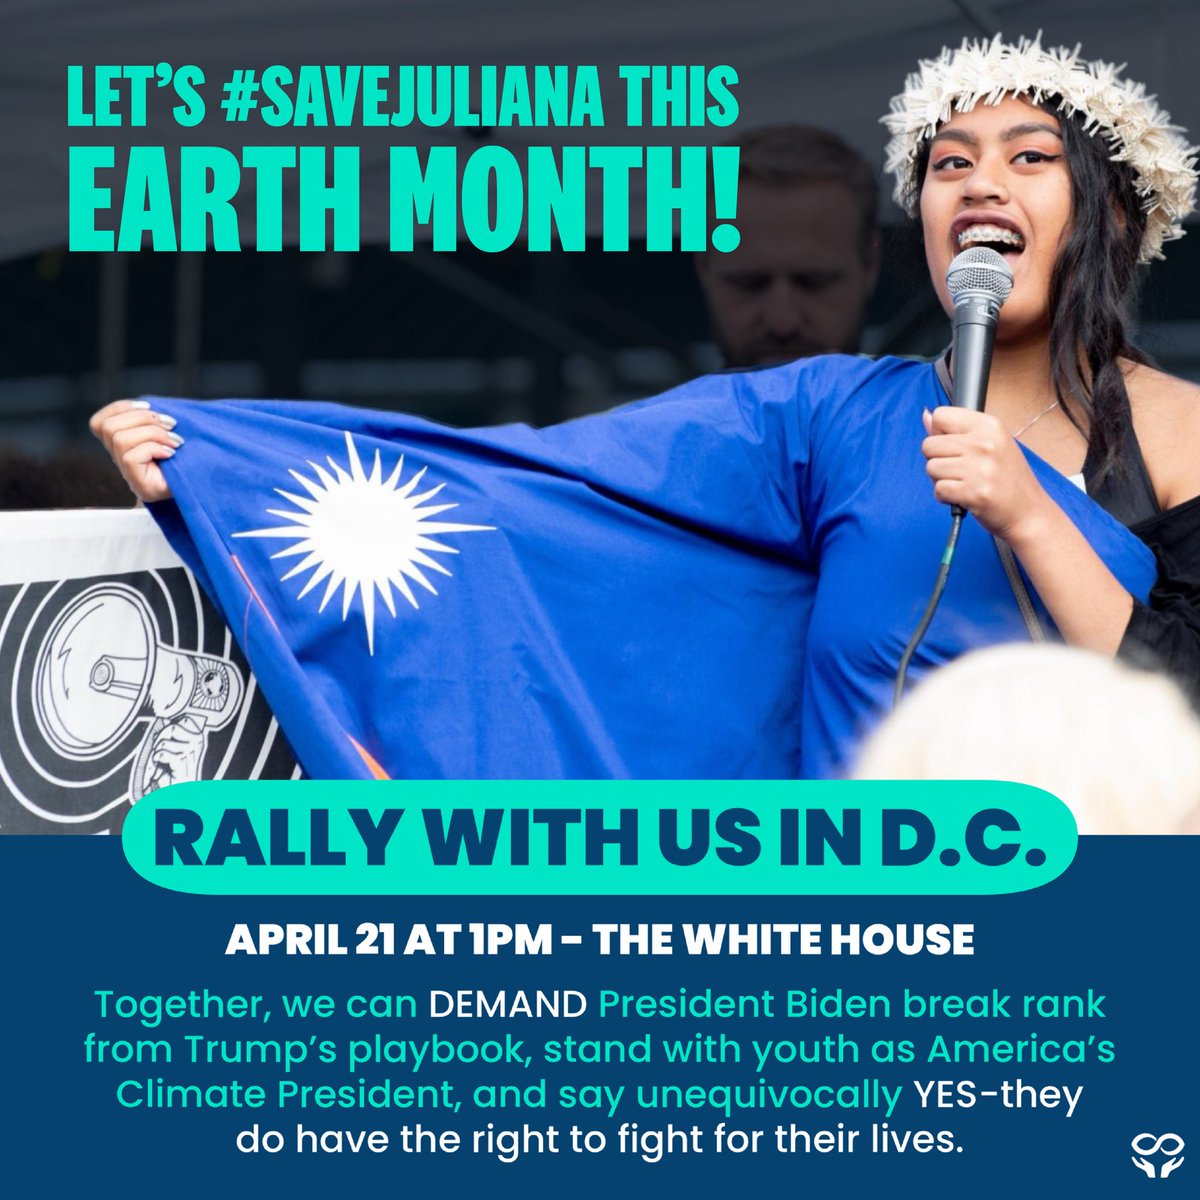 Join us and GET LOUD! You’ll hear from youth plaintiffs from across the nation including the landmark constitutional climate case, Juliana v. U.S., the winning Held v. Montana case, Genesis v. U.S. EPA, and Layla H. v. Virginia. RSVP: bit.ly/JulianaRally #YouthvGov